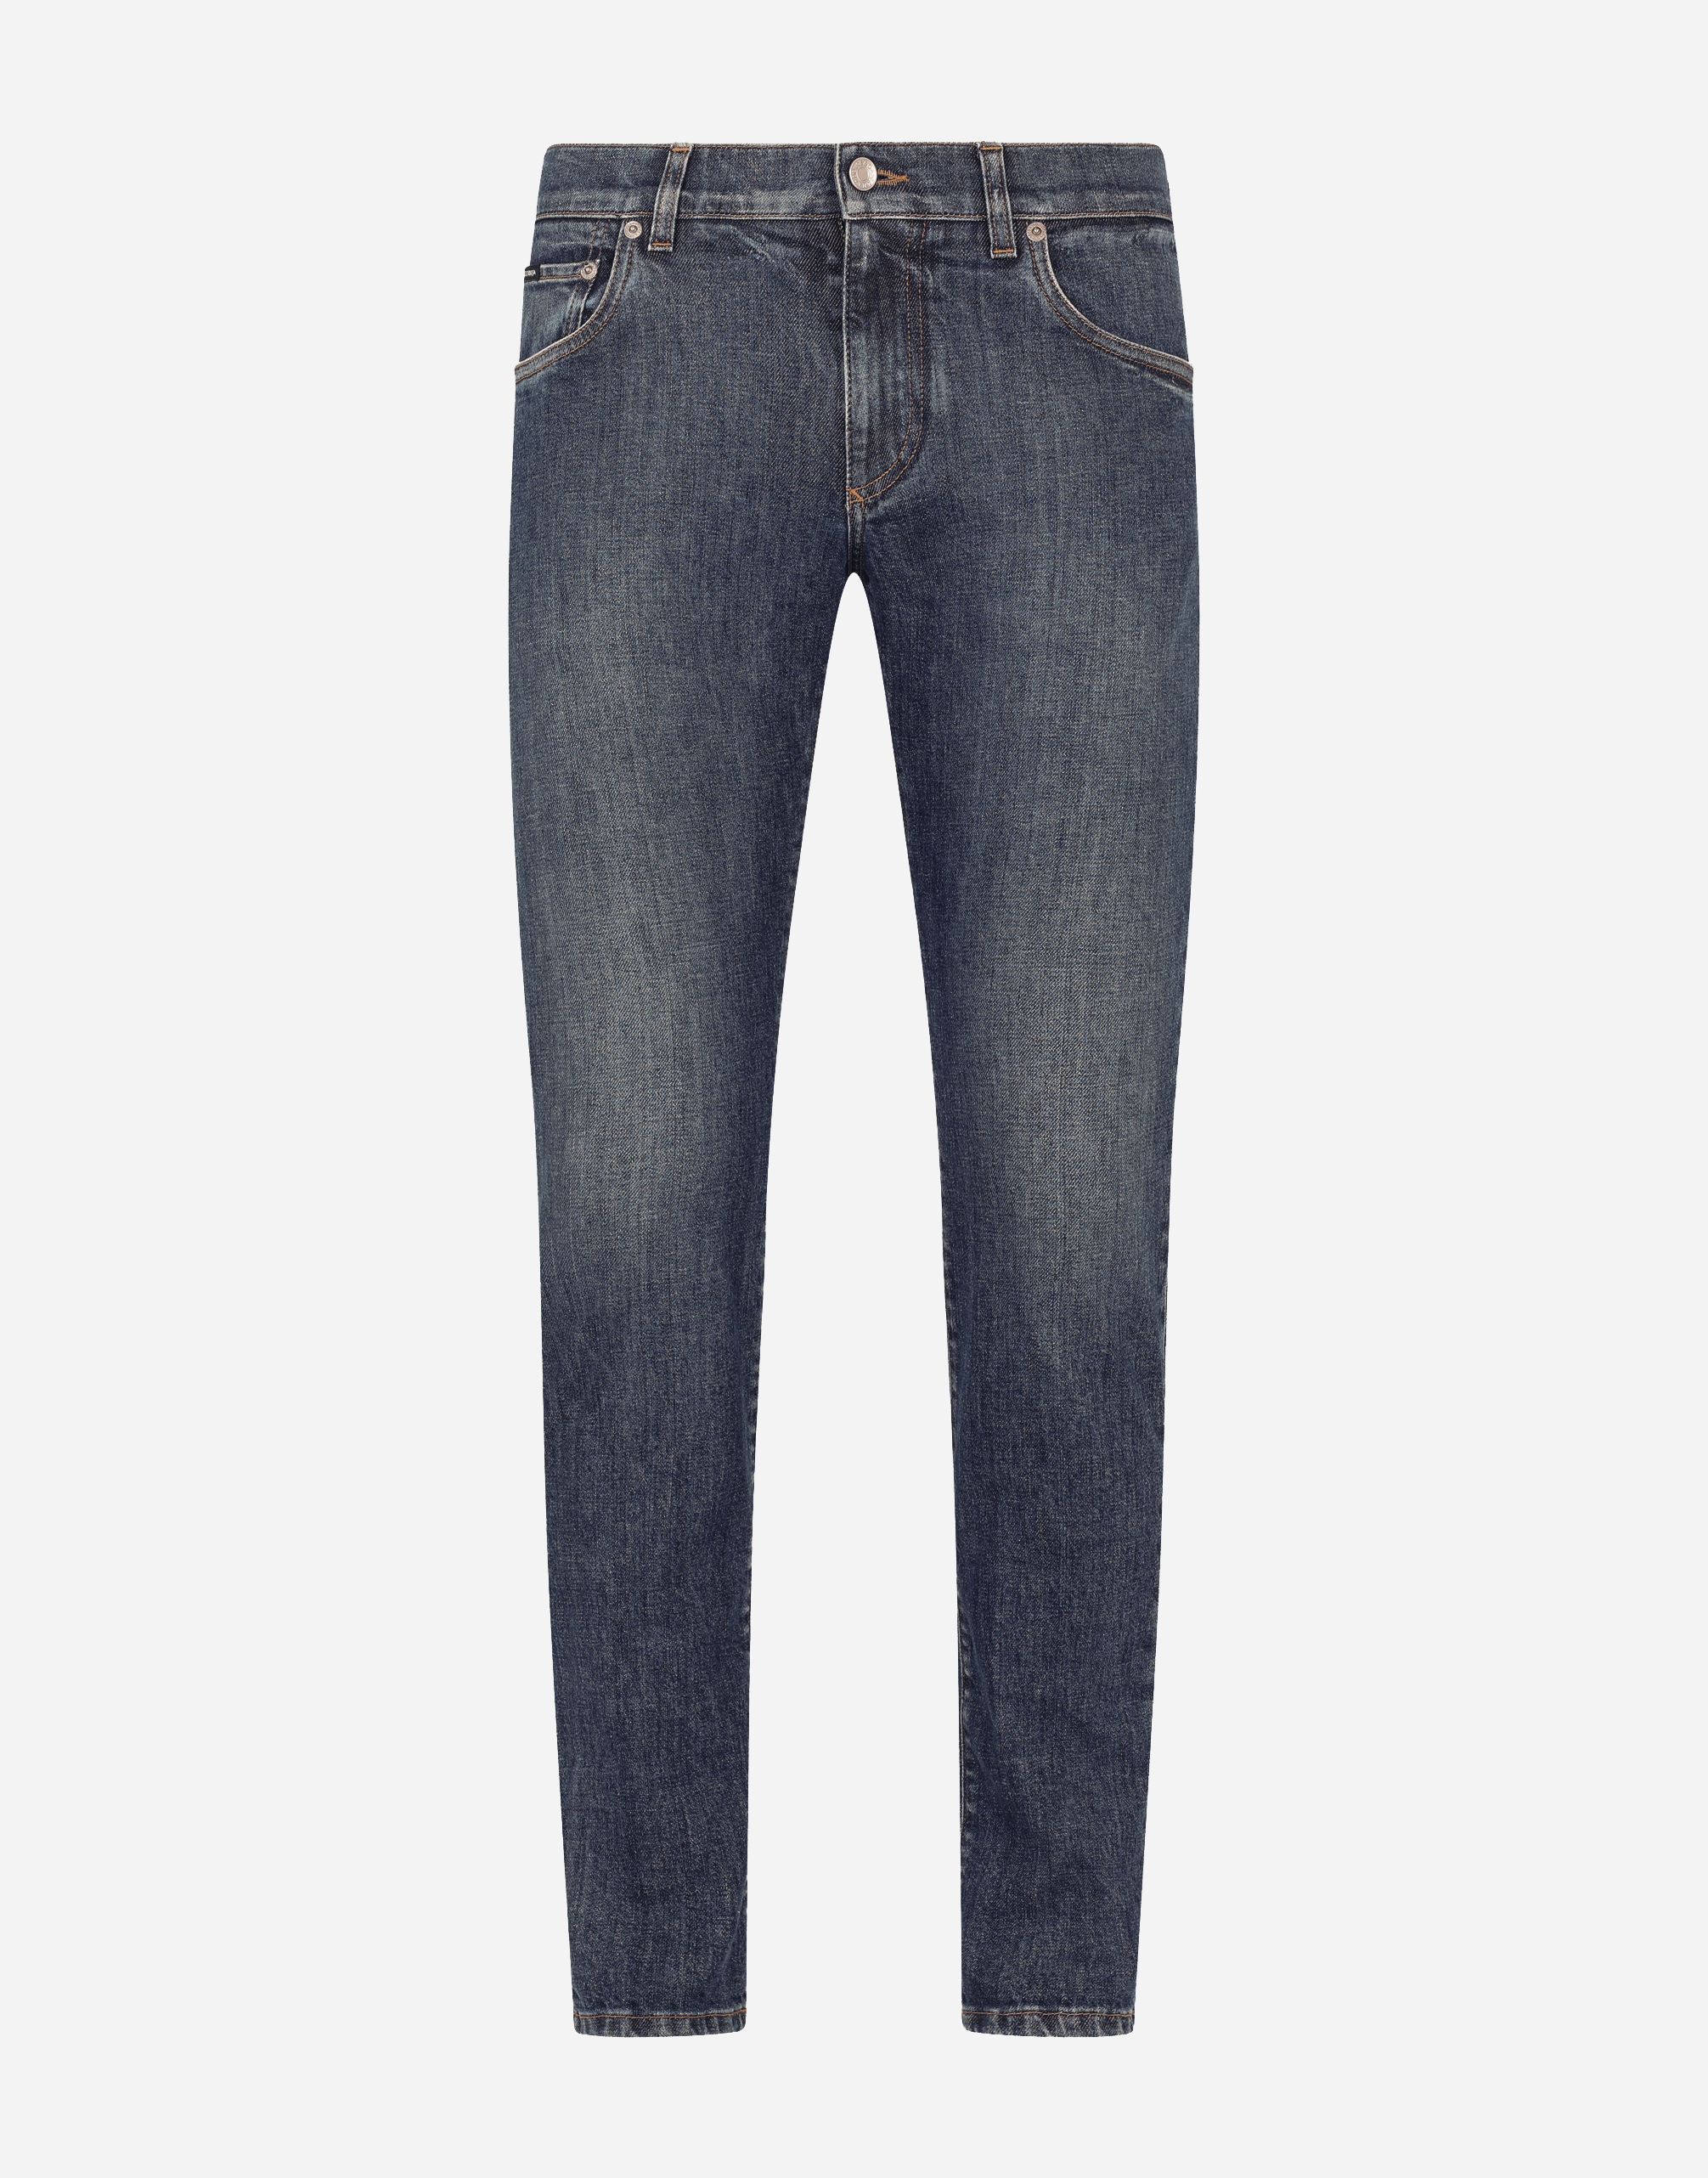 Light blue wash skinny stretch jeans in Multicolor